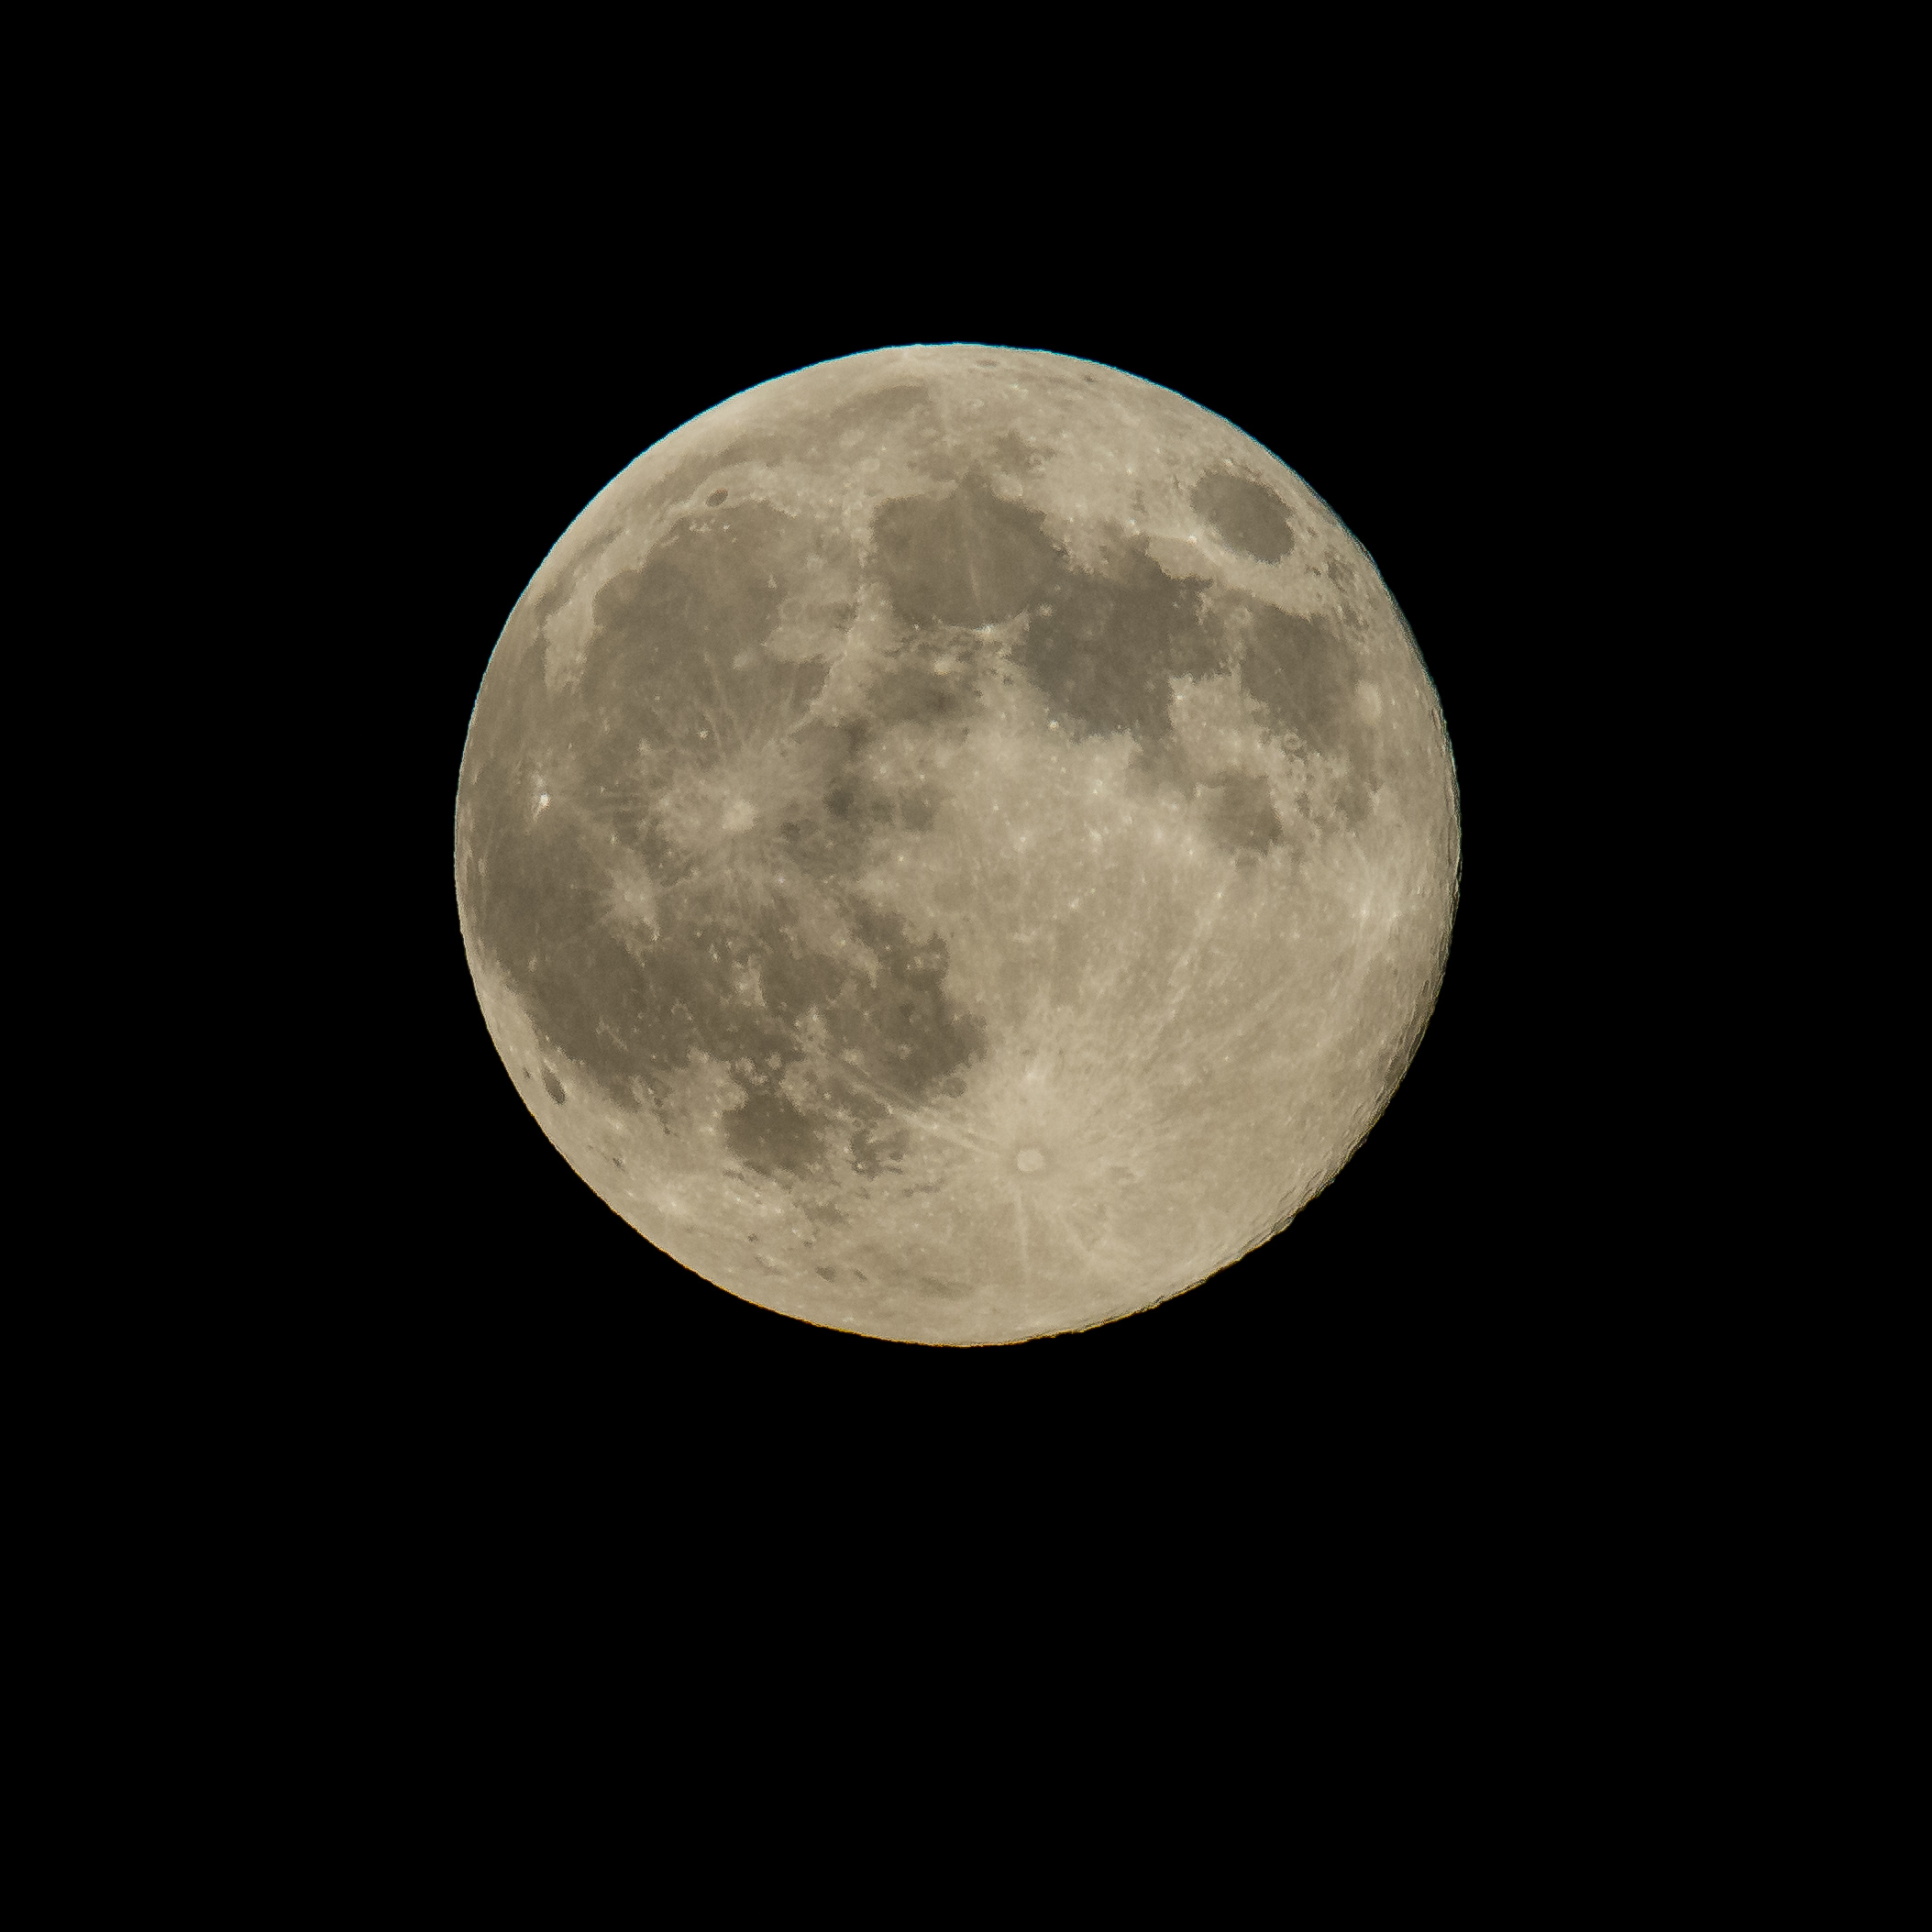 Full disc view of the Moon.